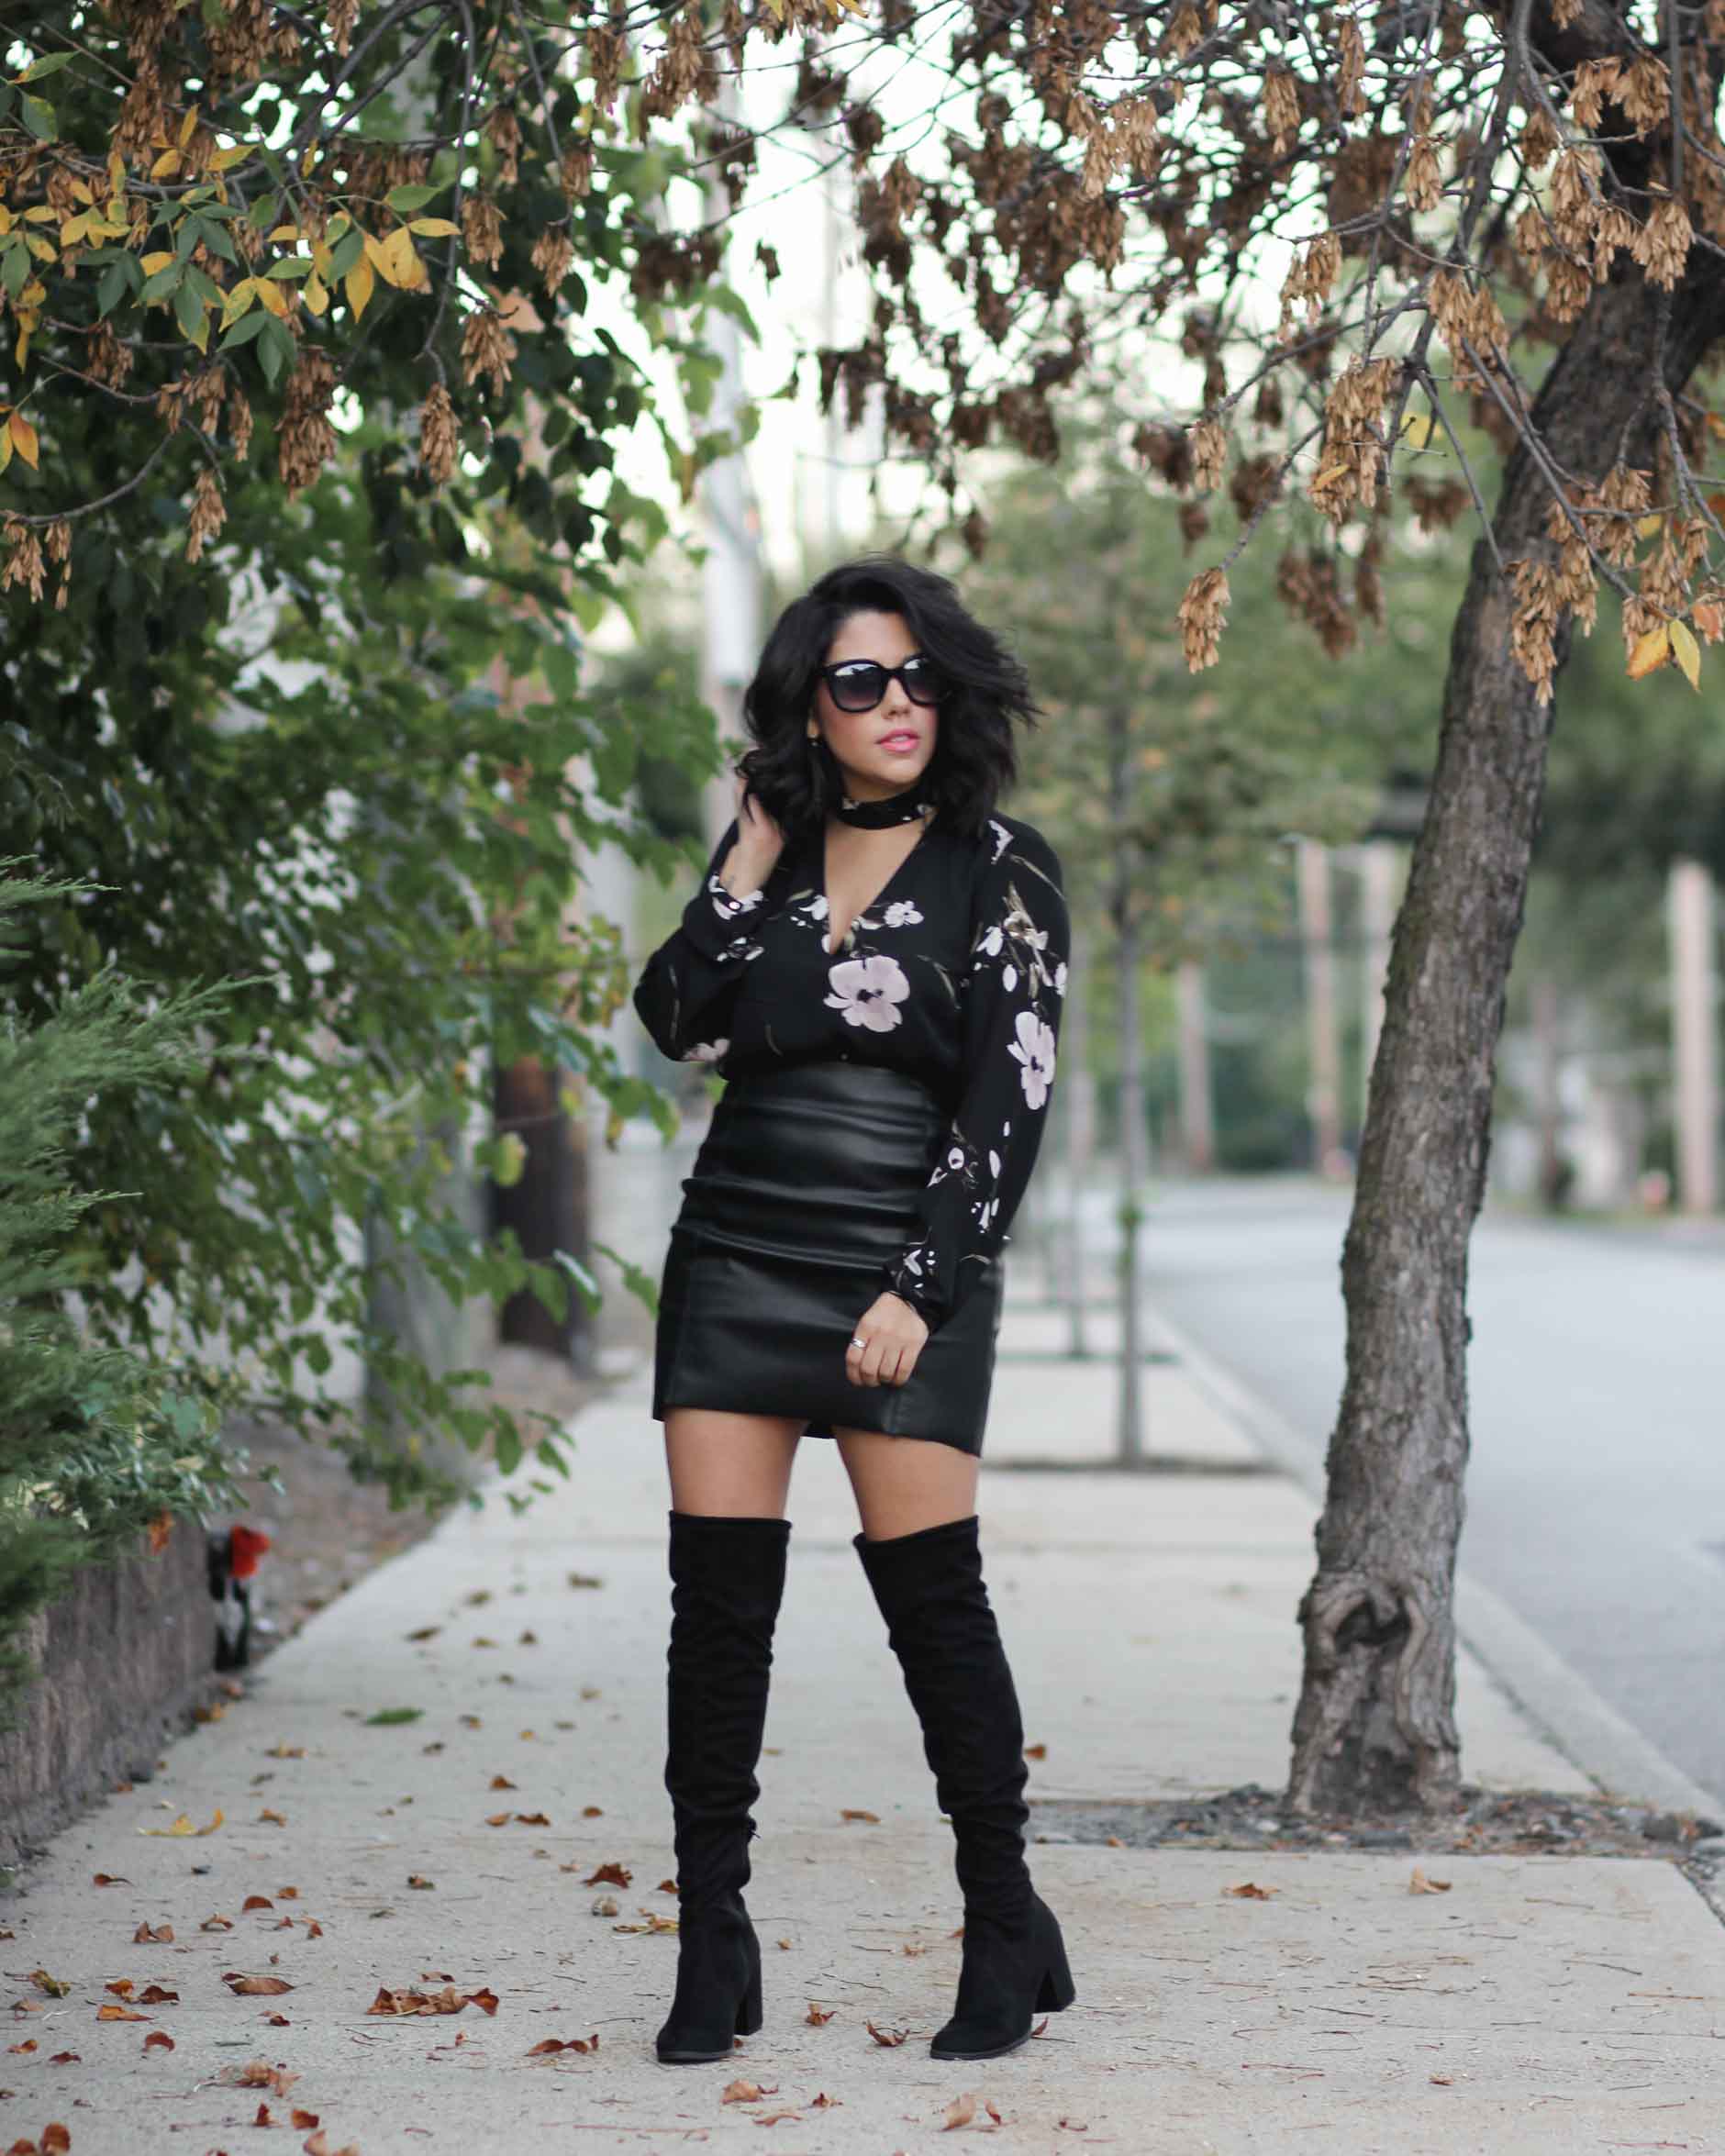 lifestyle blogger naty michele wearing OTK boots and a leather skirt